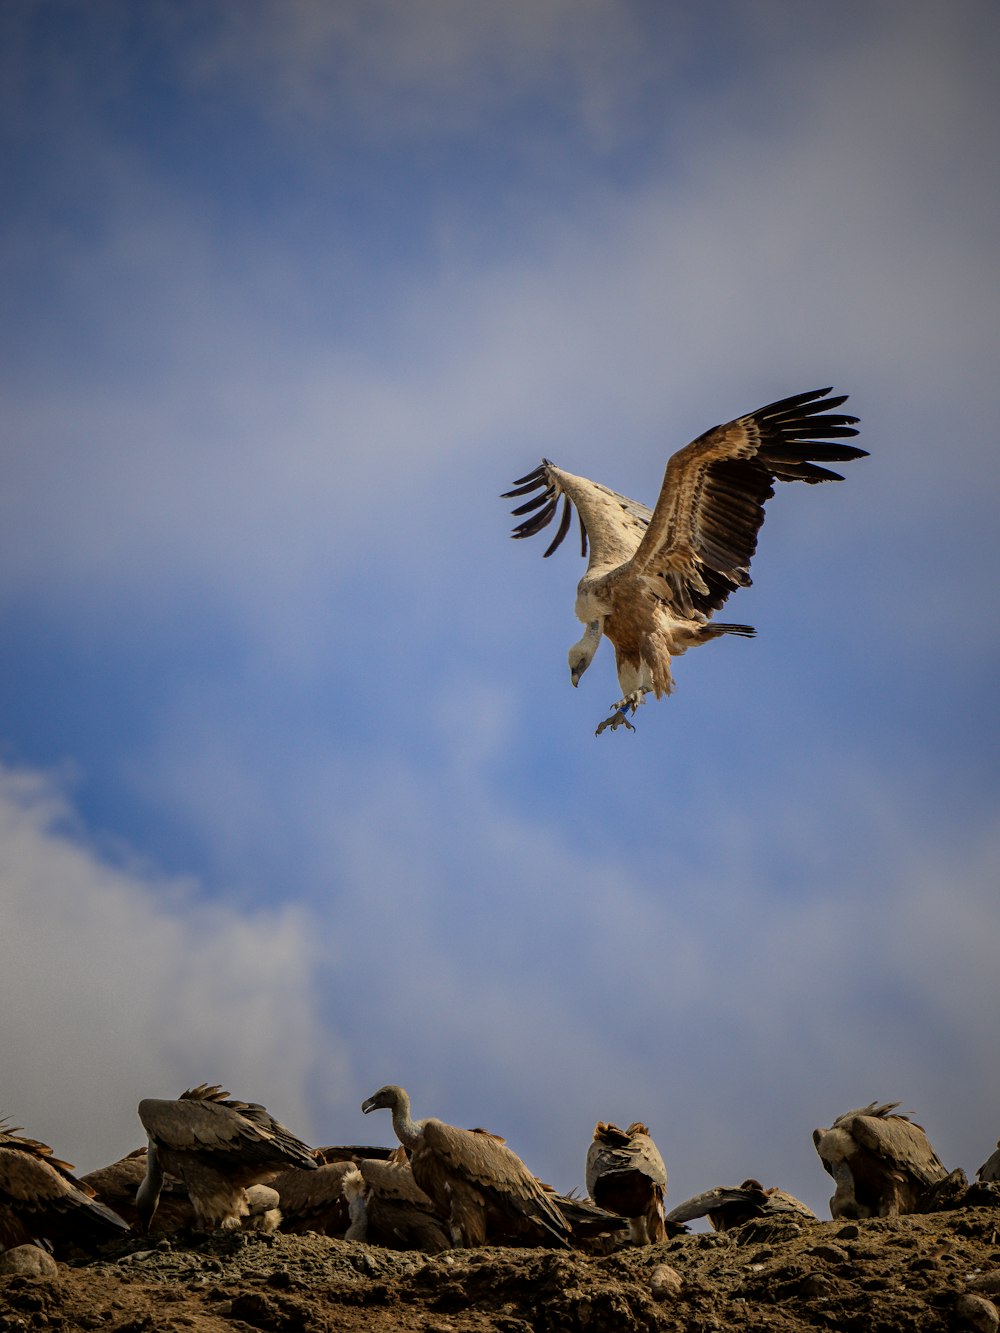 a large bird flying over a group of birds